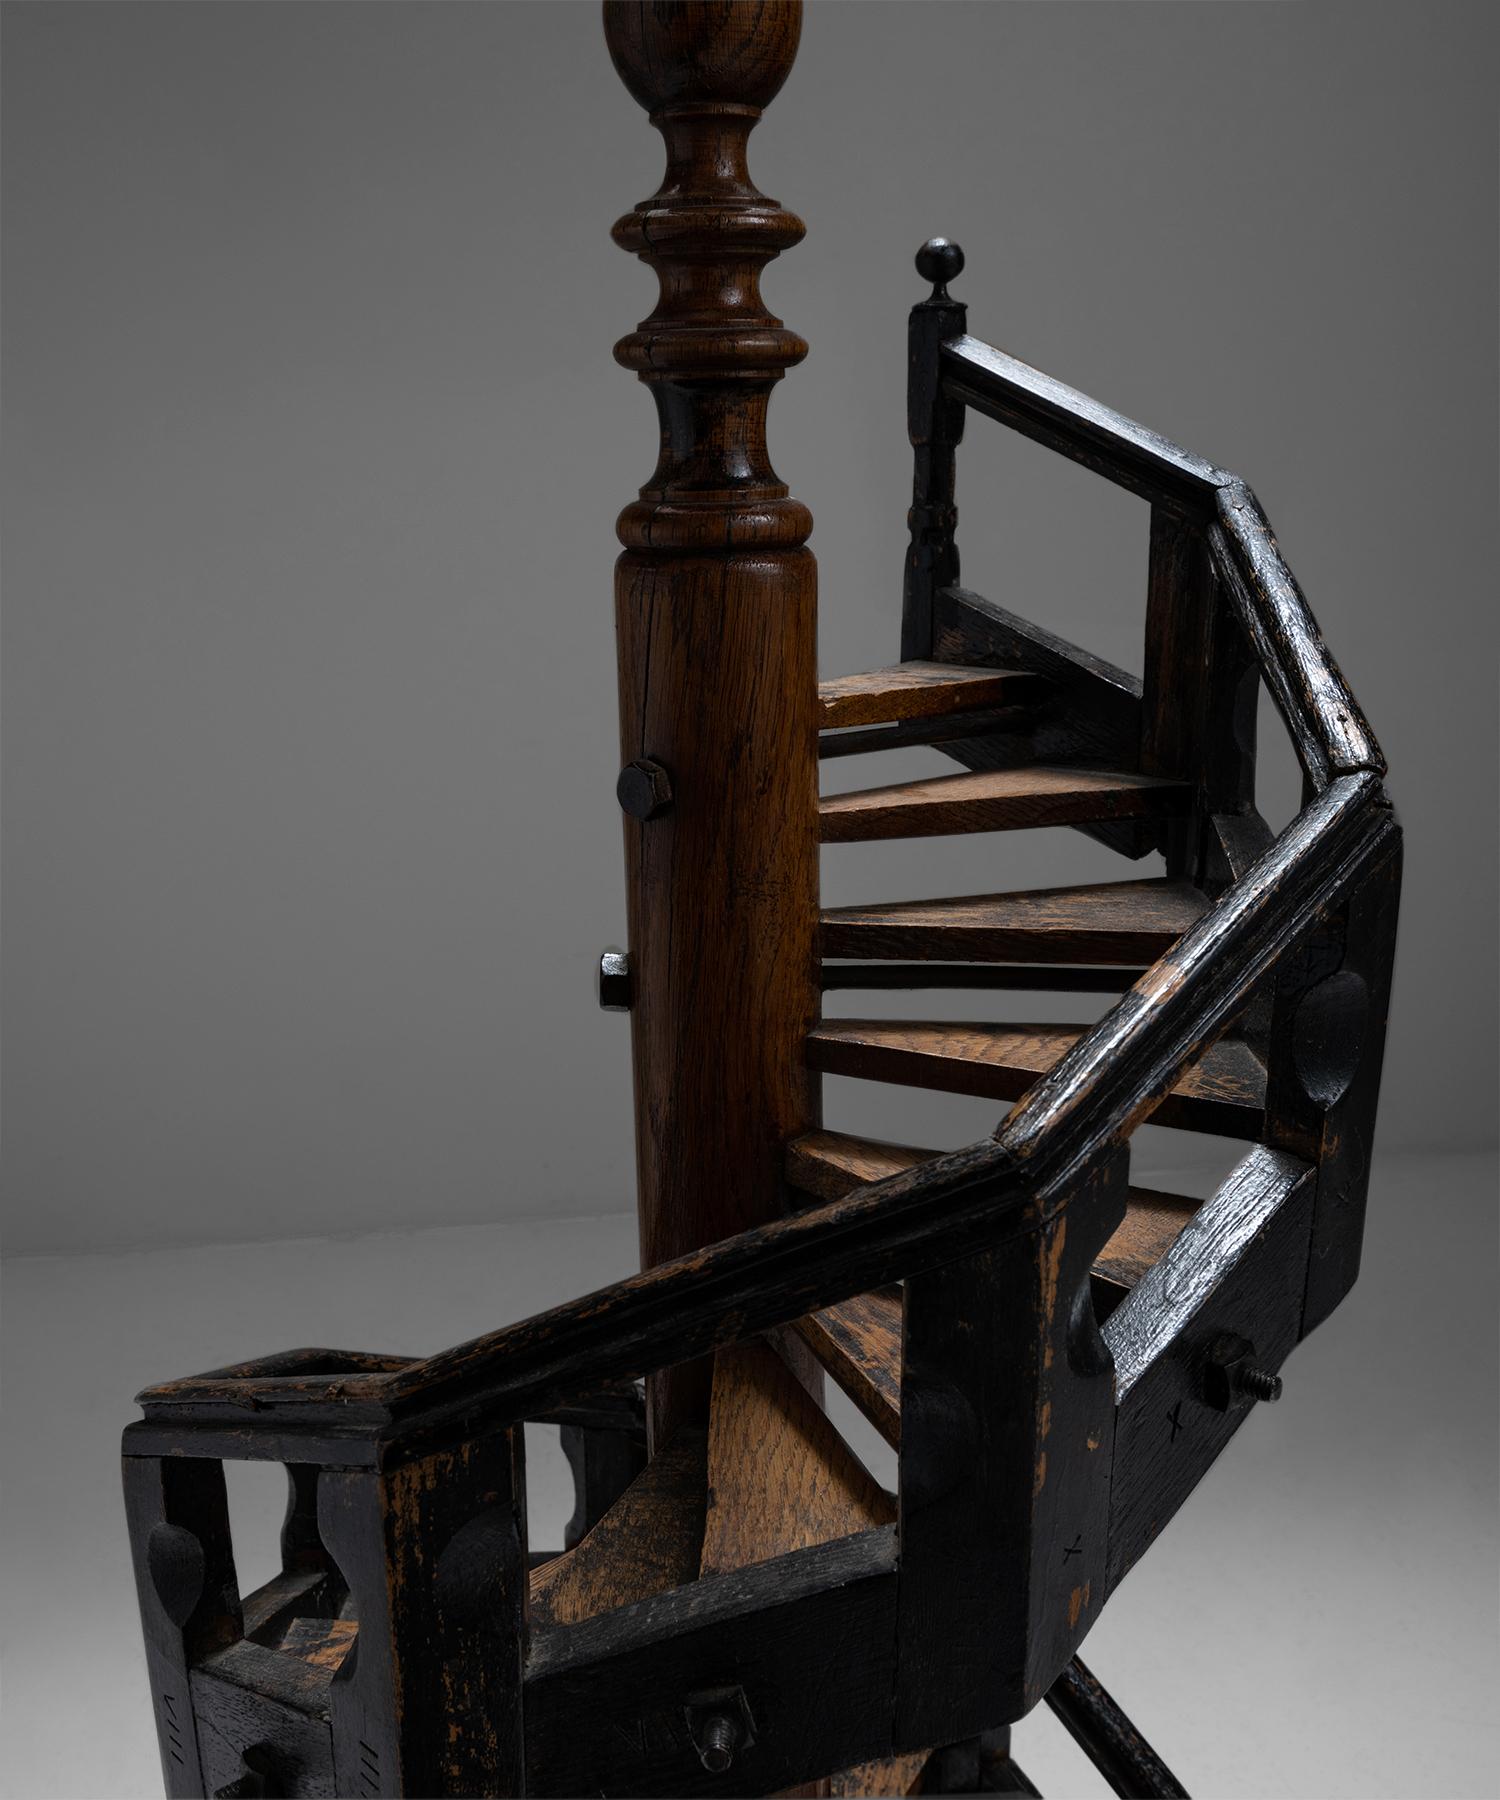 Architectural staircase model

England circa 1890

Oak spiral staircase with ebonised balustrade and a central pillar.